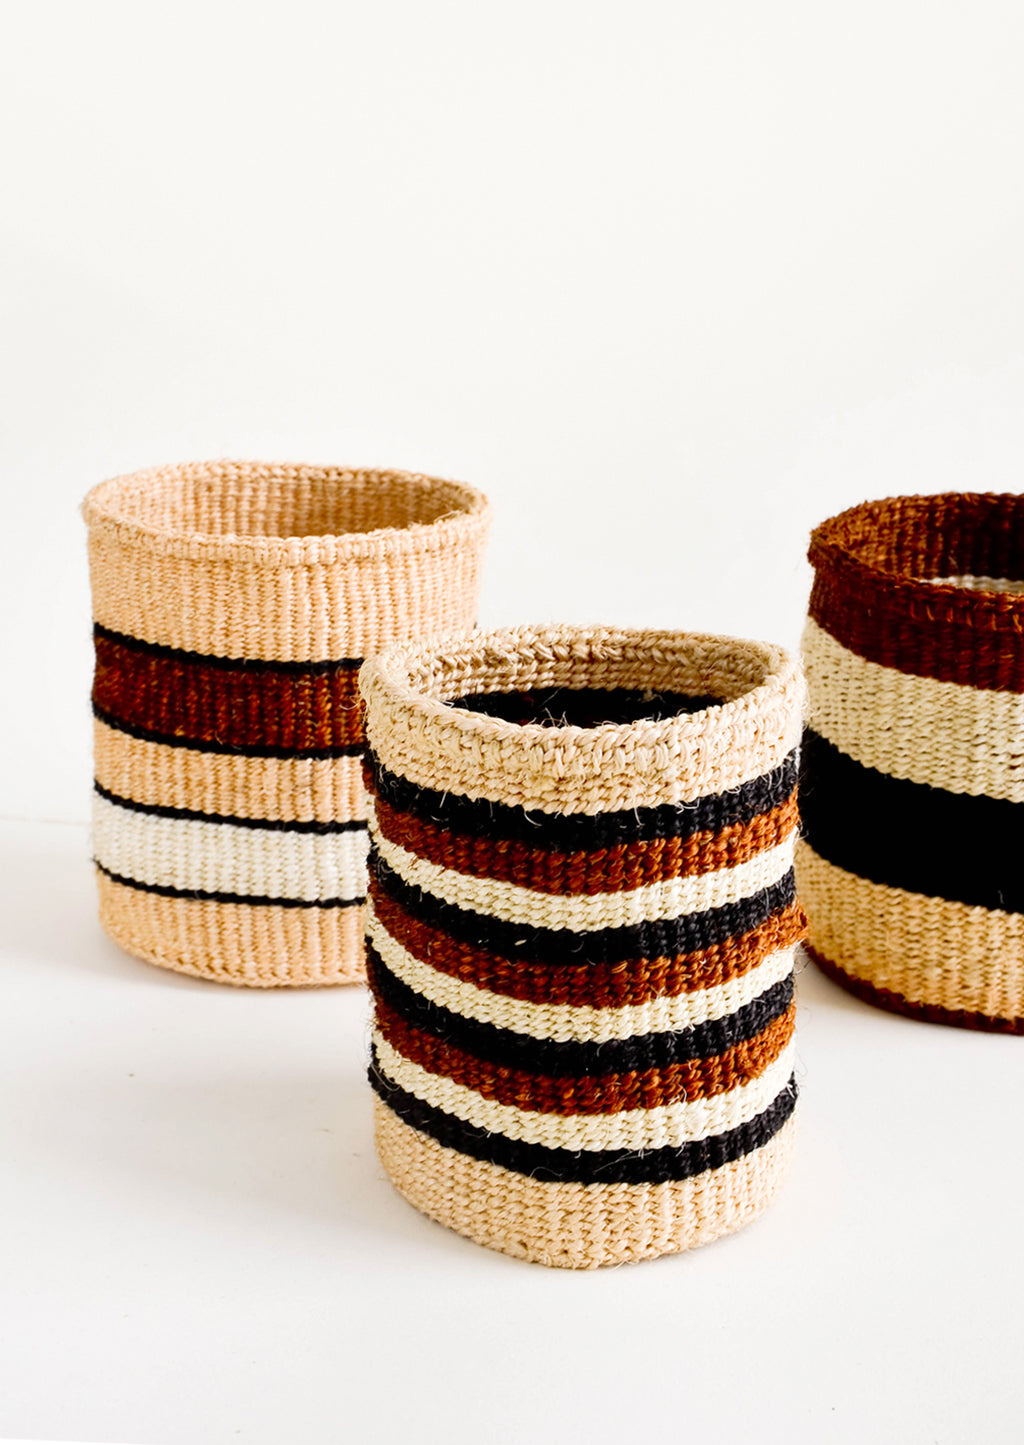 2: Small, round storage baskets in an assortment of striped patterns